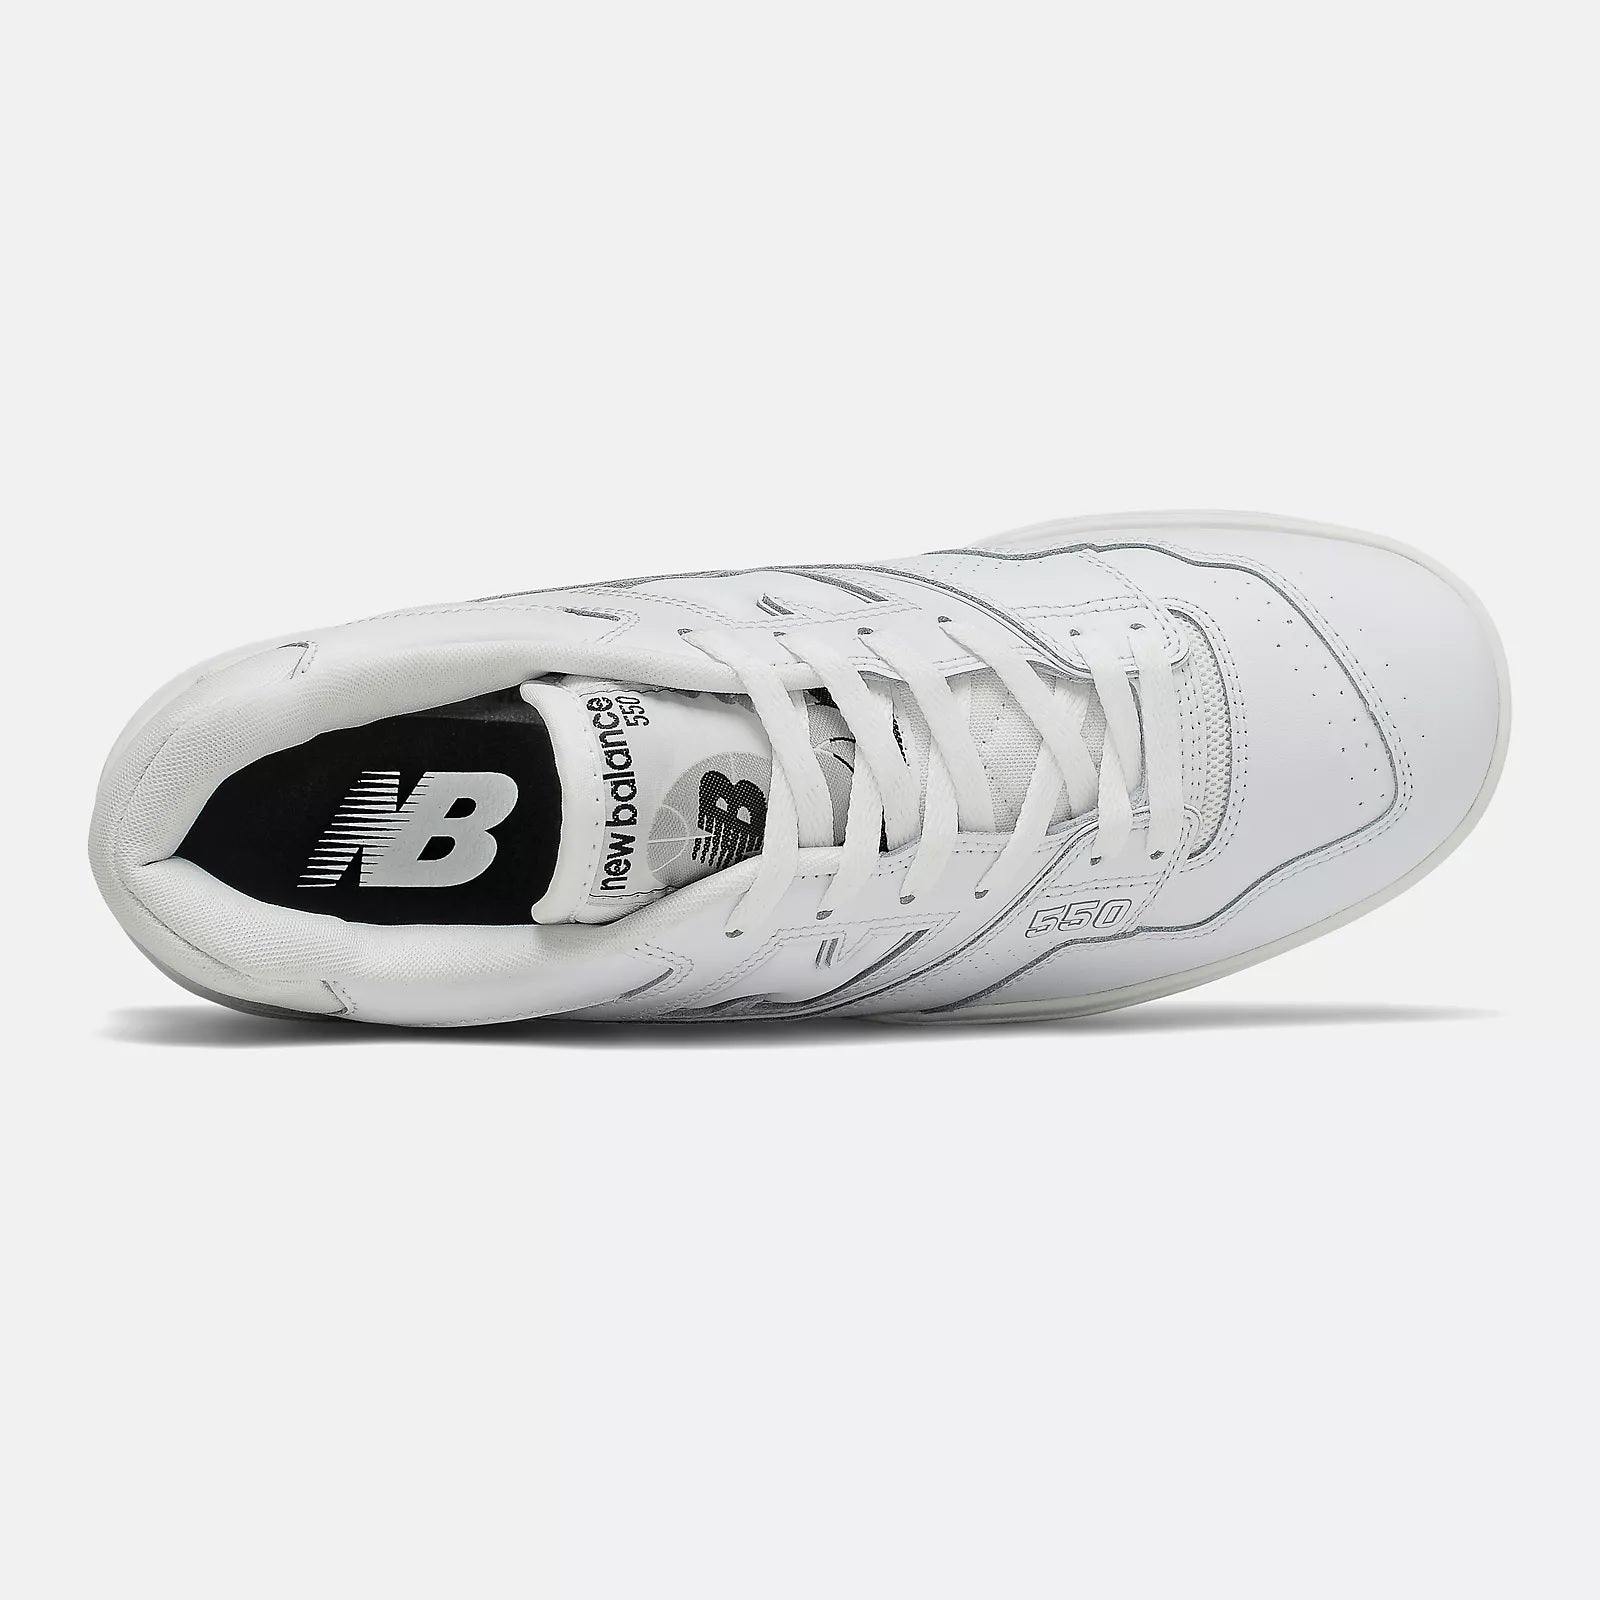 New Balance 550 White Grey - Lit Fitters Portugal